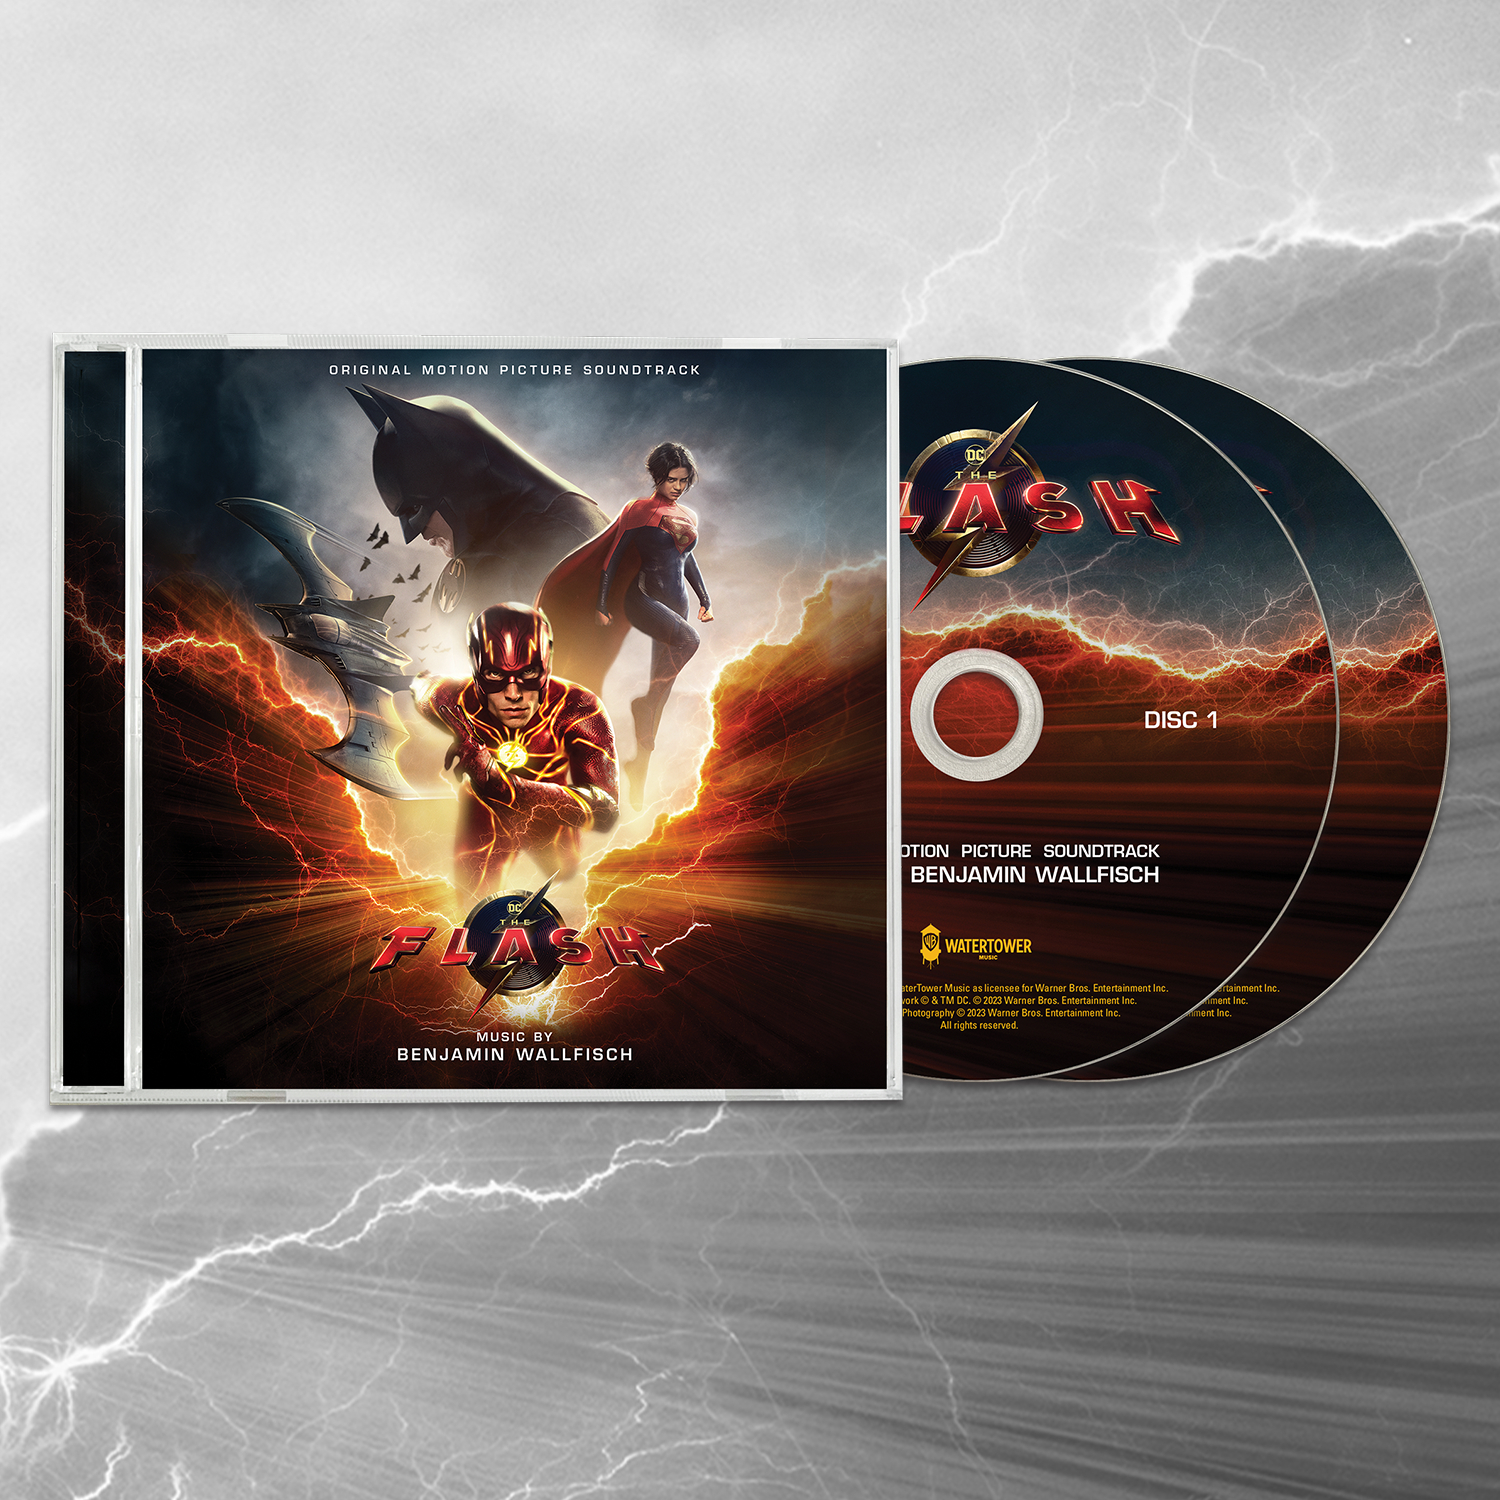 THE FLASH (ORIGINAL MOTION PICTURE SOUNDTRACK) NOW AVAILABLE FROM 